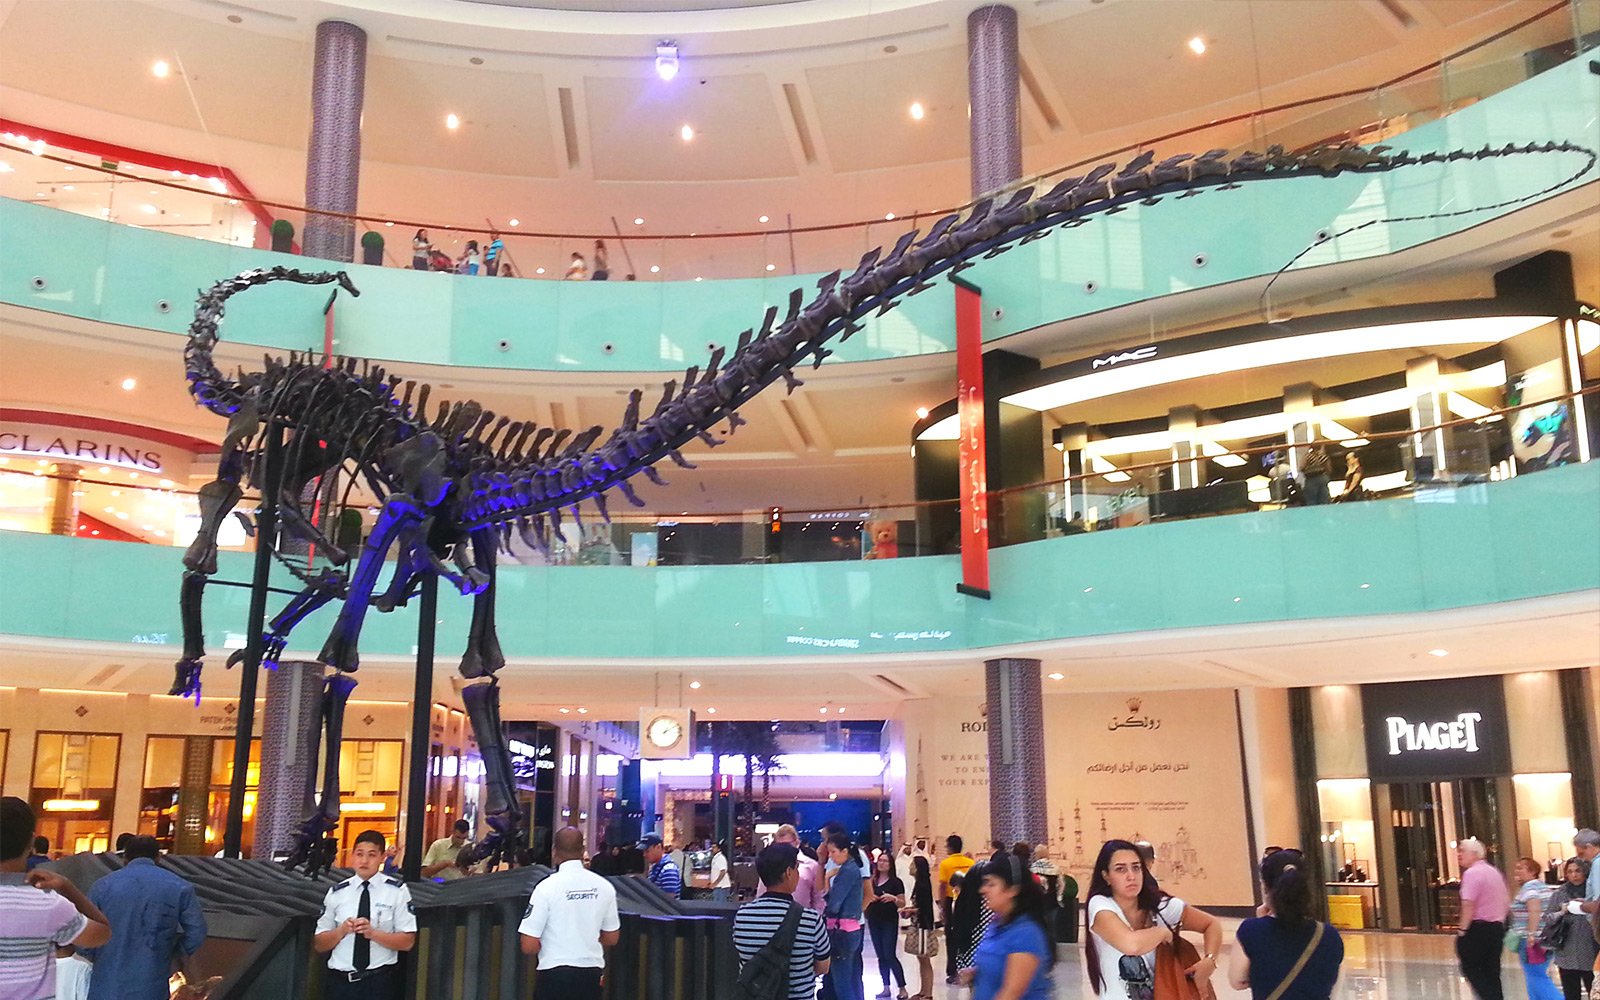 How to see a skeleton of a gigantic 155,000,000-year-old dinosaur in Dubai